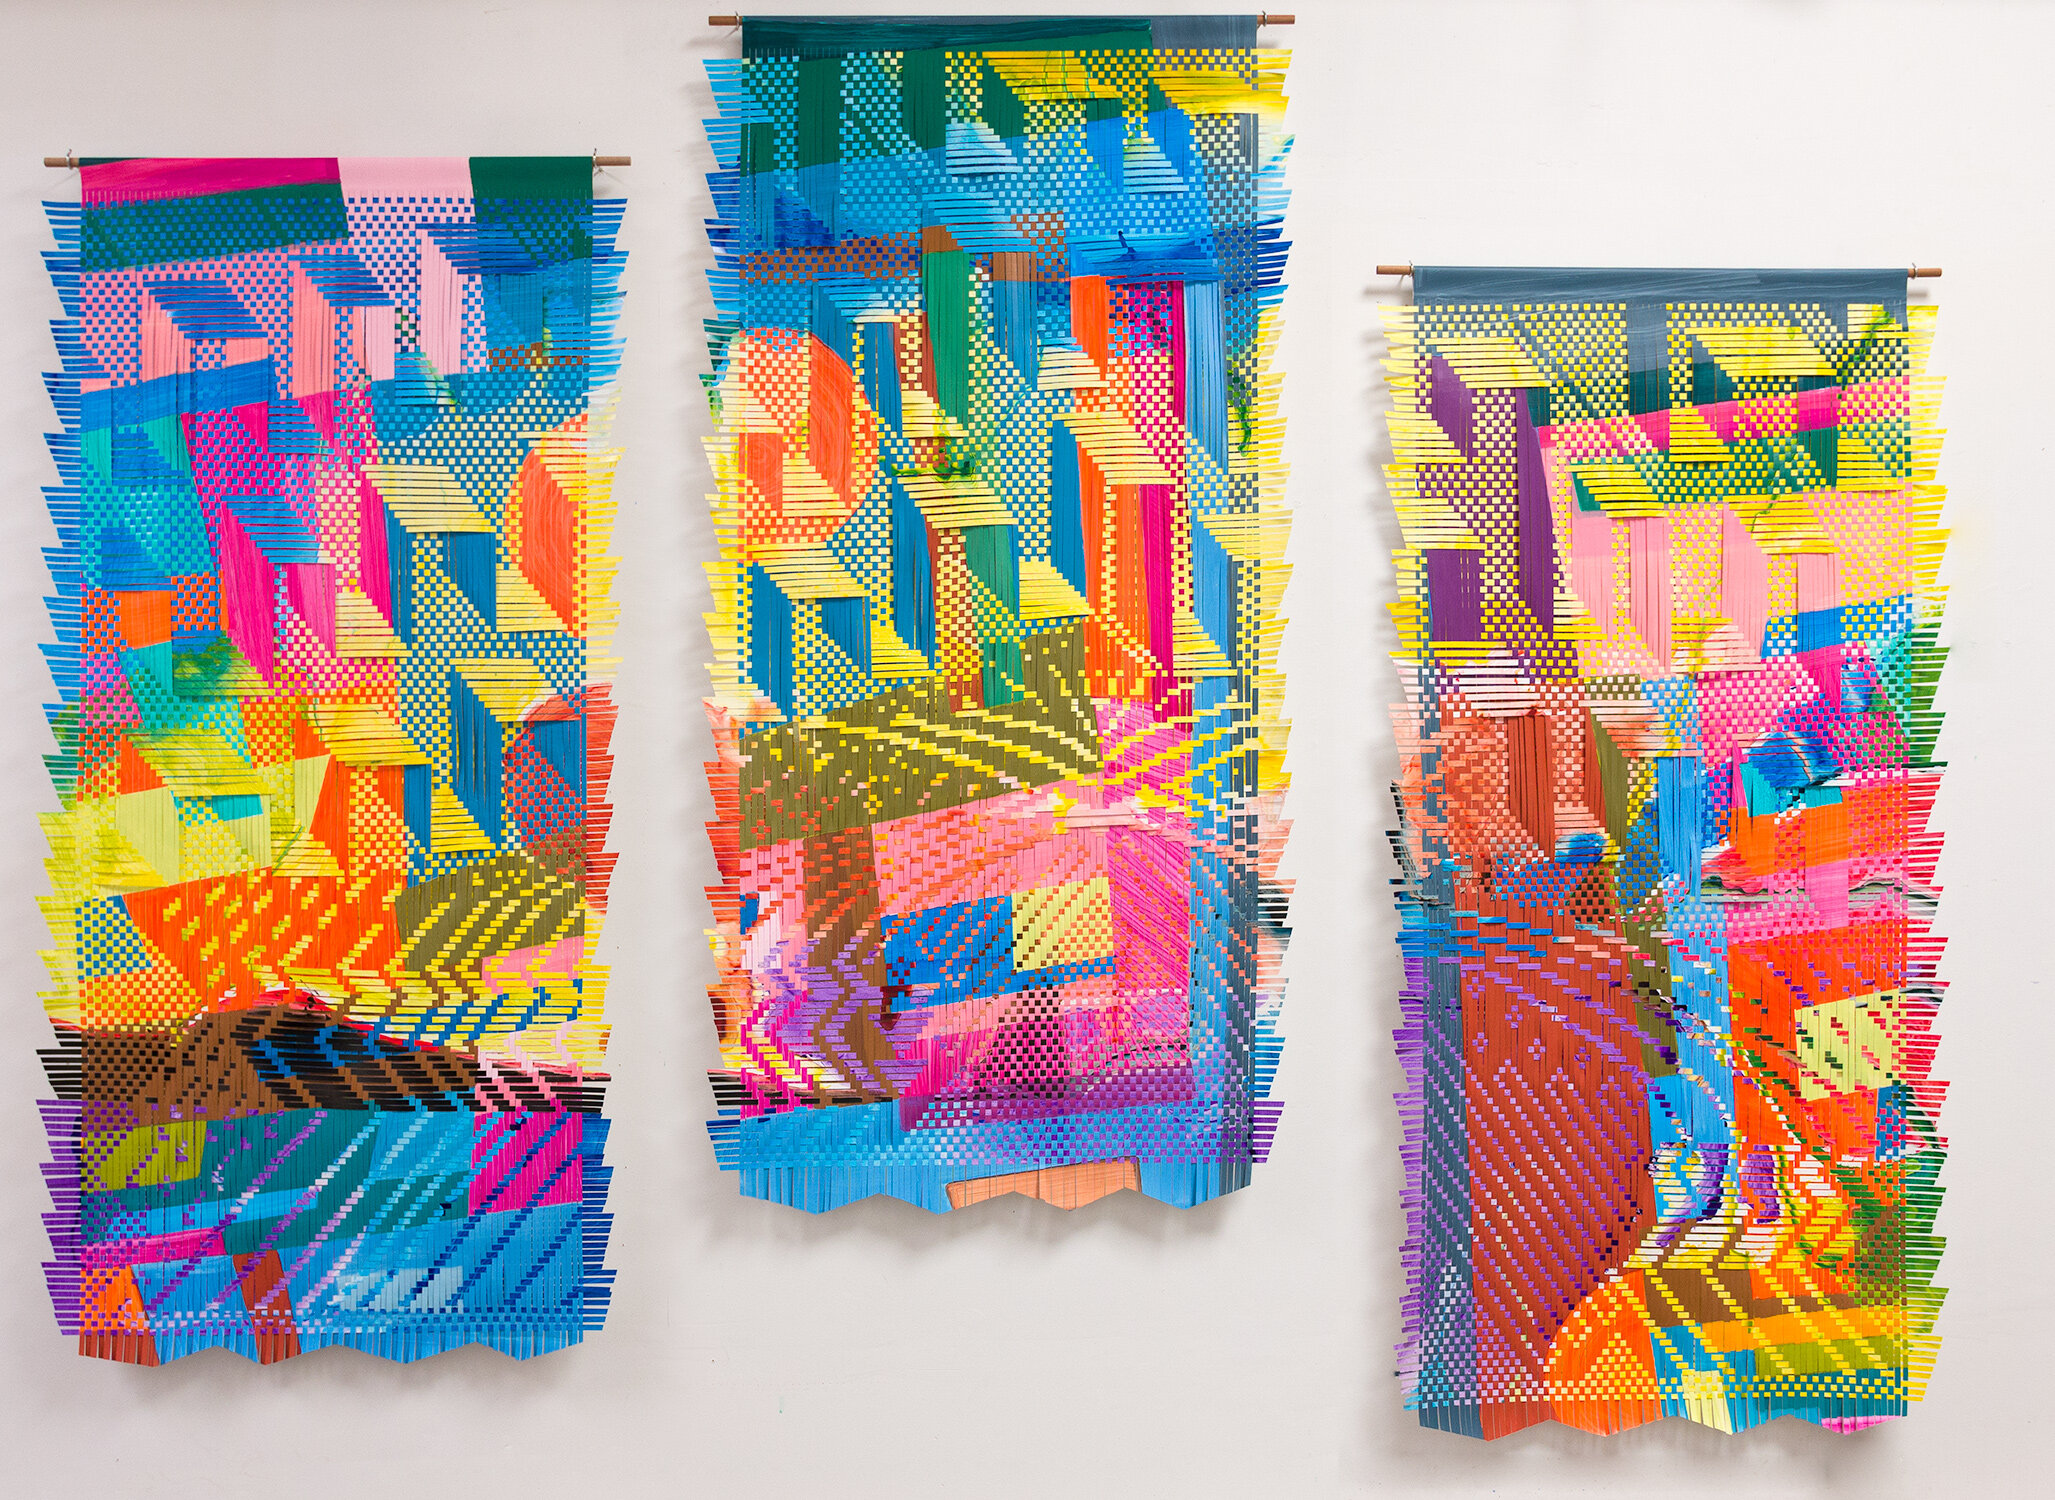 In These Unprecedented Times, 2020, woven acrylic on Yupo, triptych 8' x 4' each.